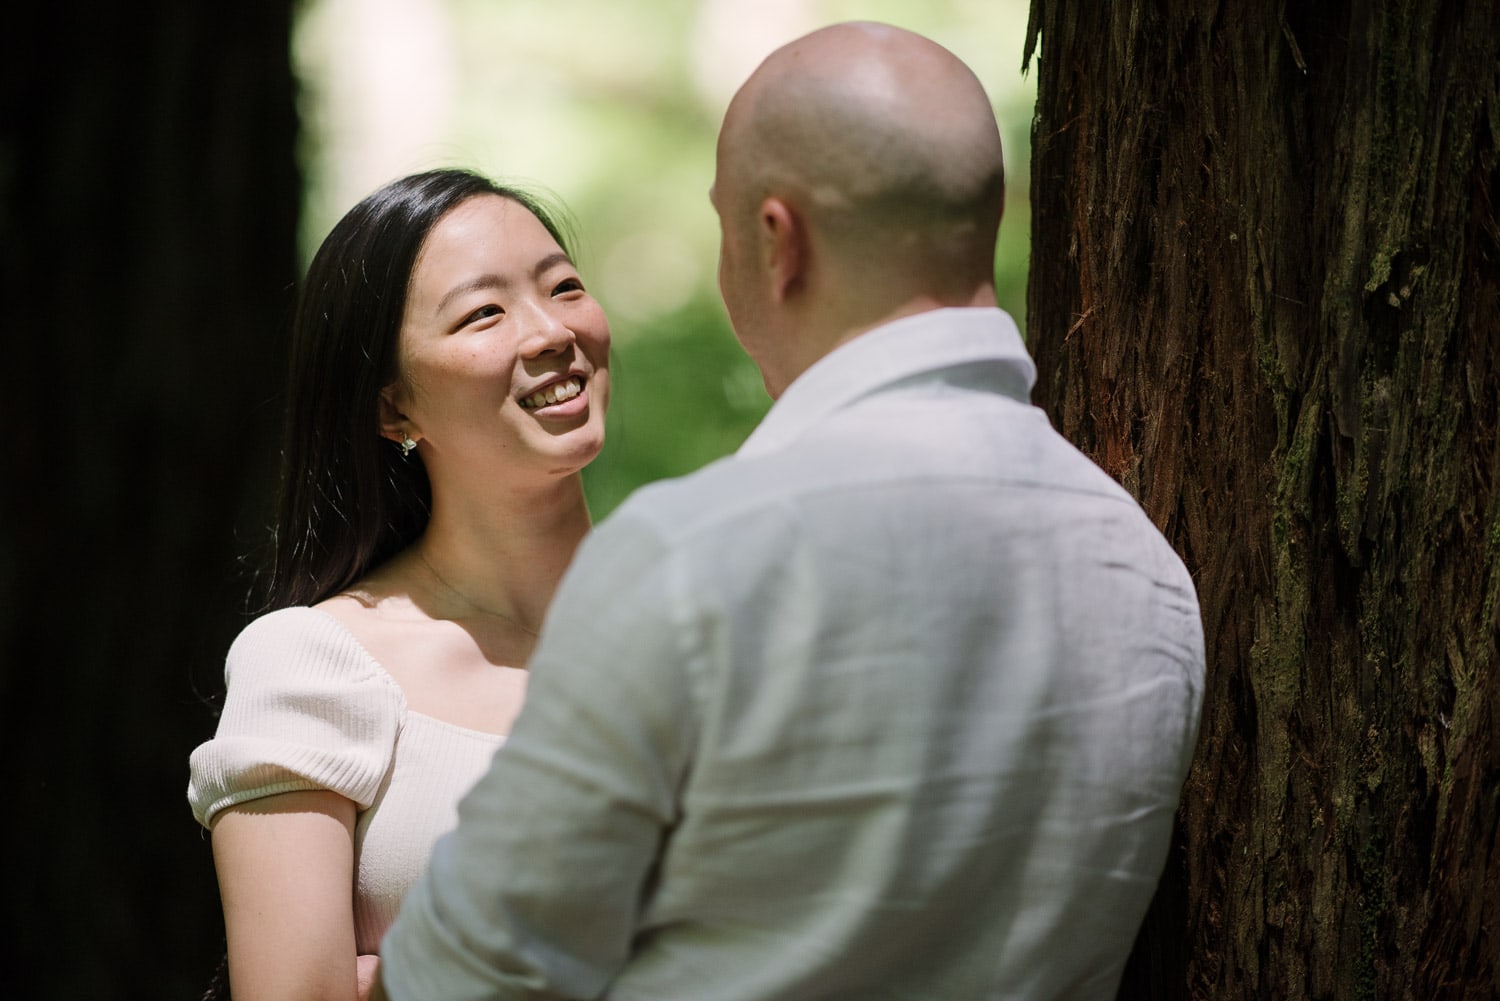 The california redwoods are an awesome place to elope